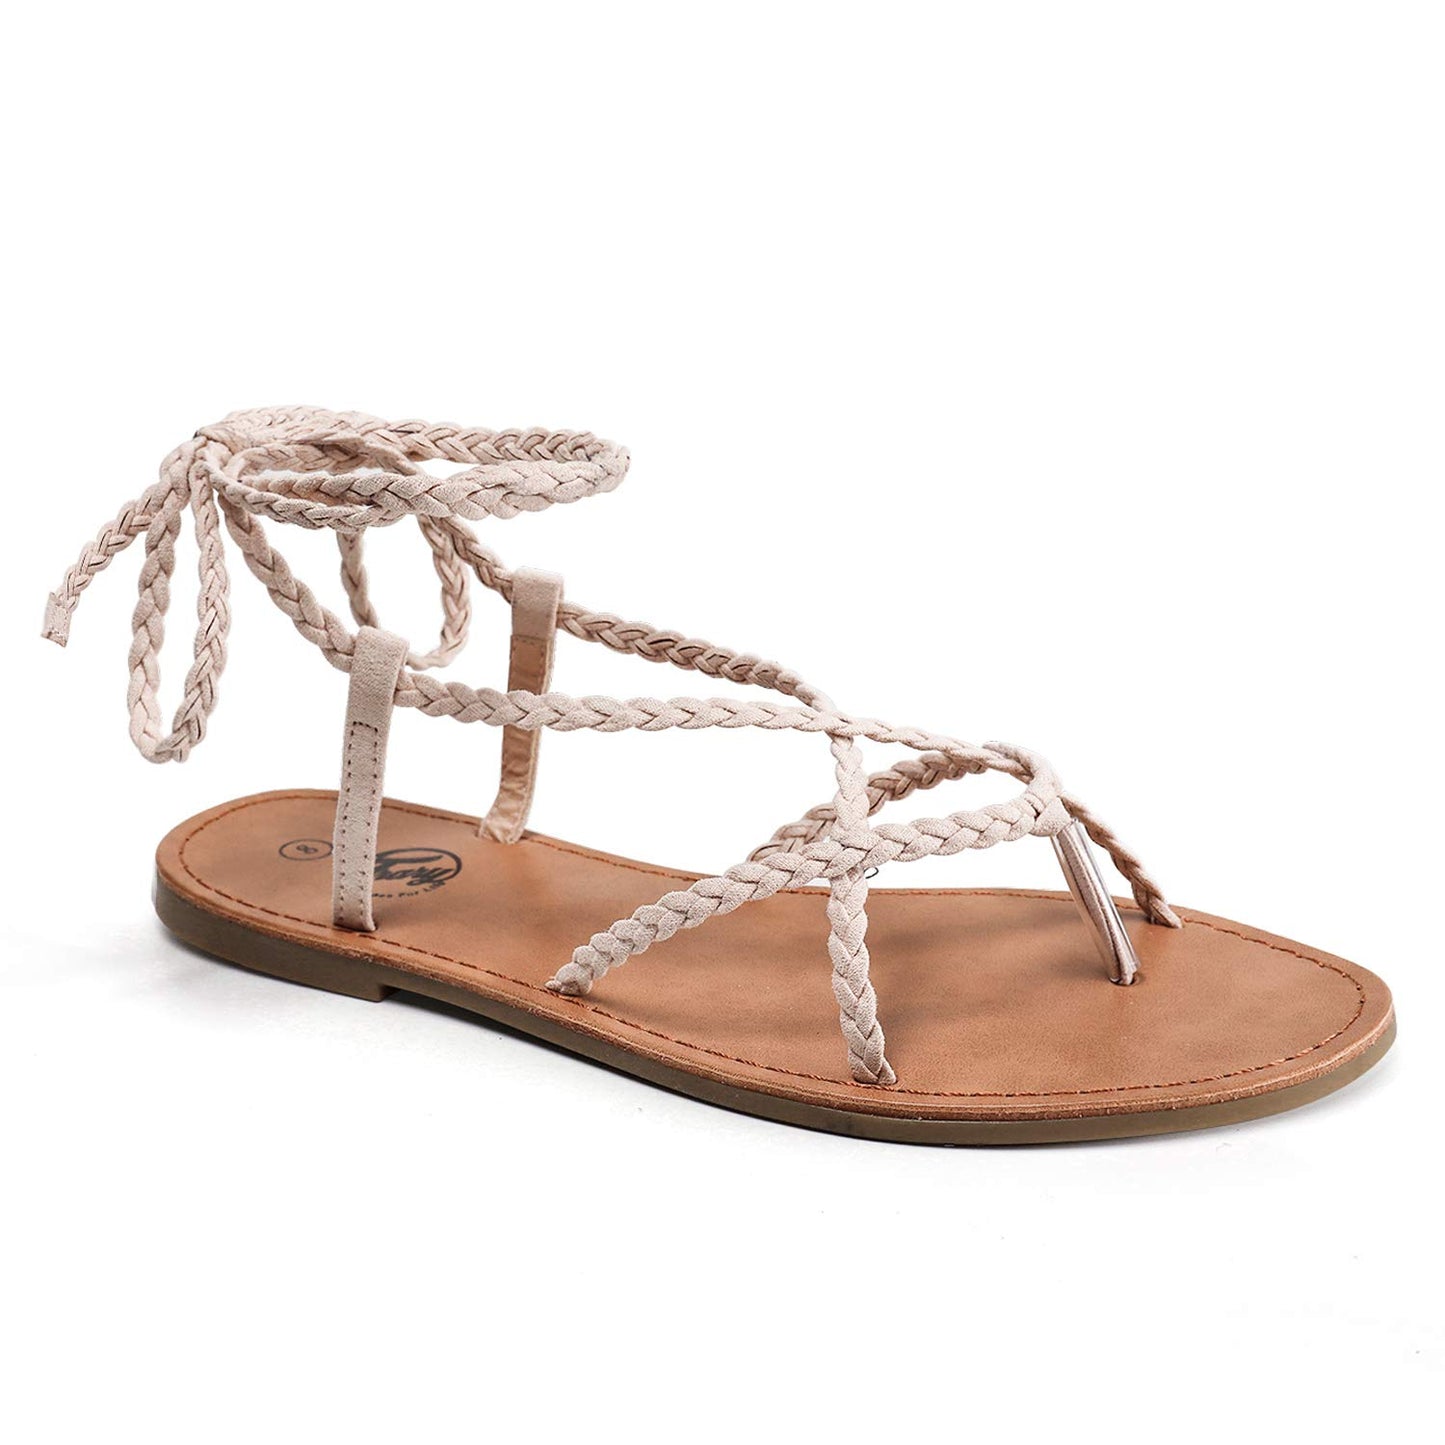 Braided Lace Up Open Toe Sandals